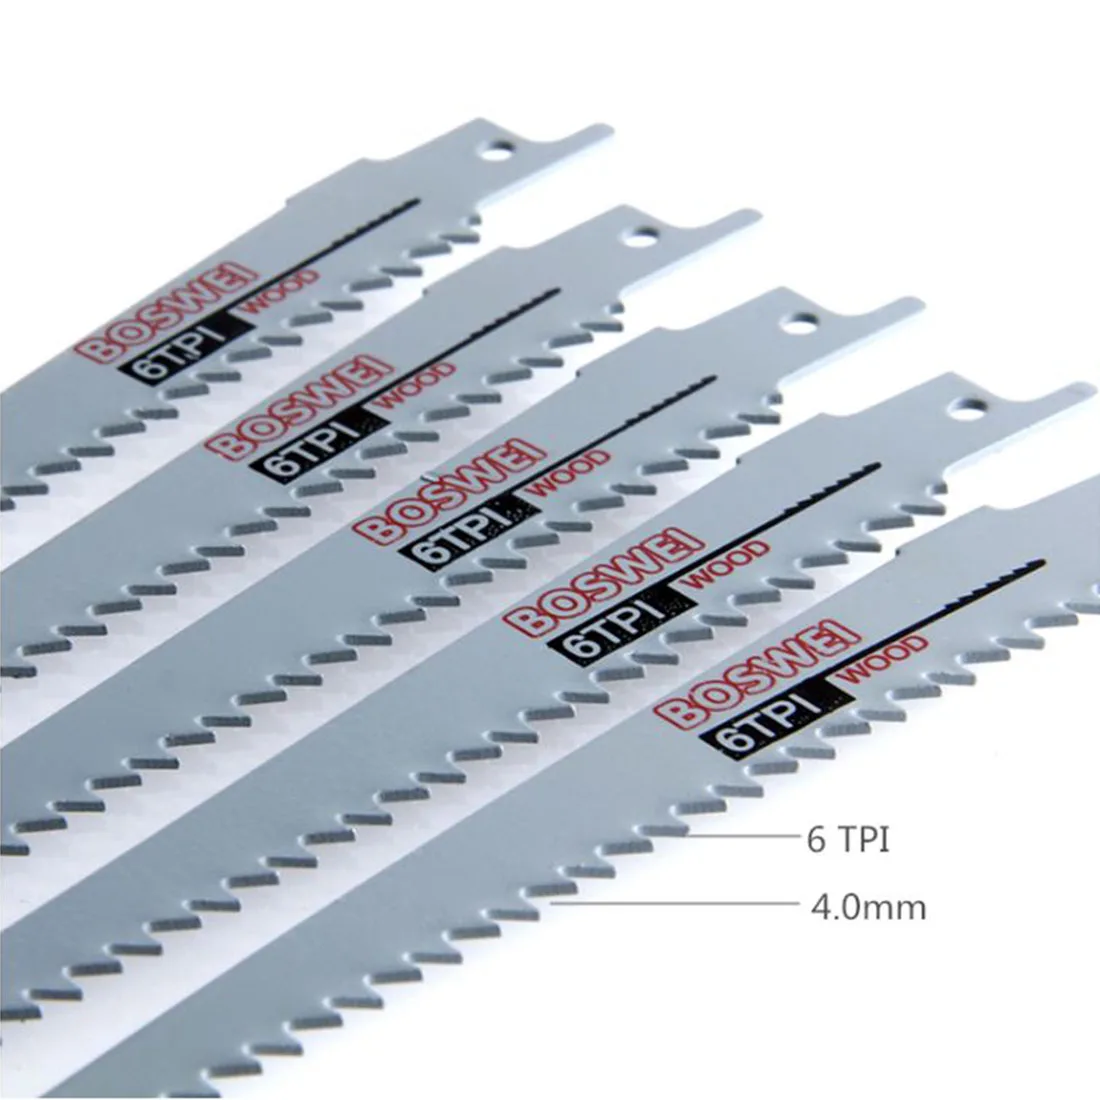 

5pcs S644D Reciprocating Jig Saw Blades 150mm Extra Sharp HCS Saw Cutter Handsaw Multi Saw Blades For Wood Metal Cutting Tools